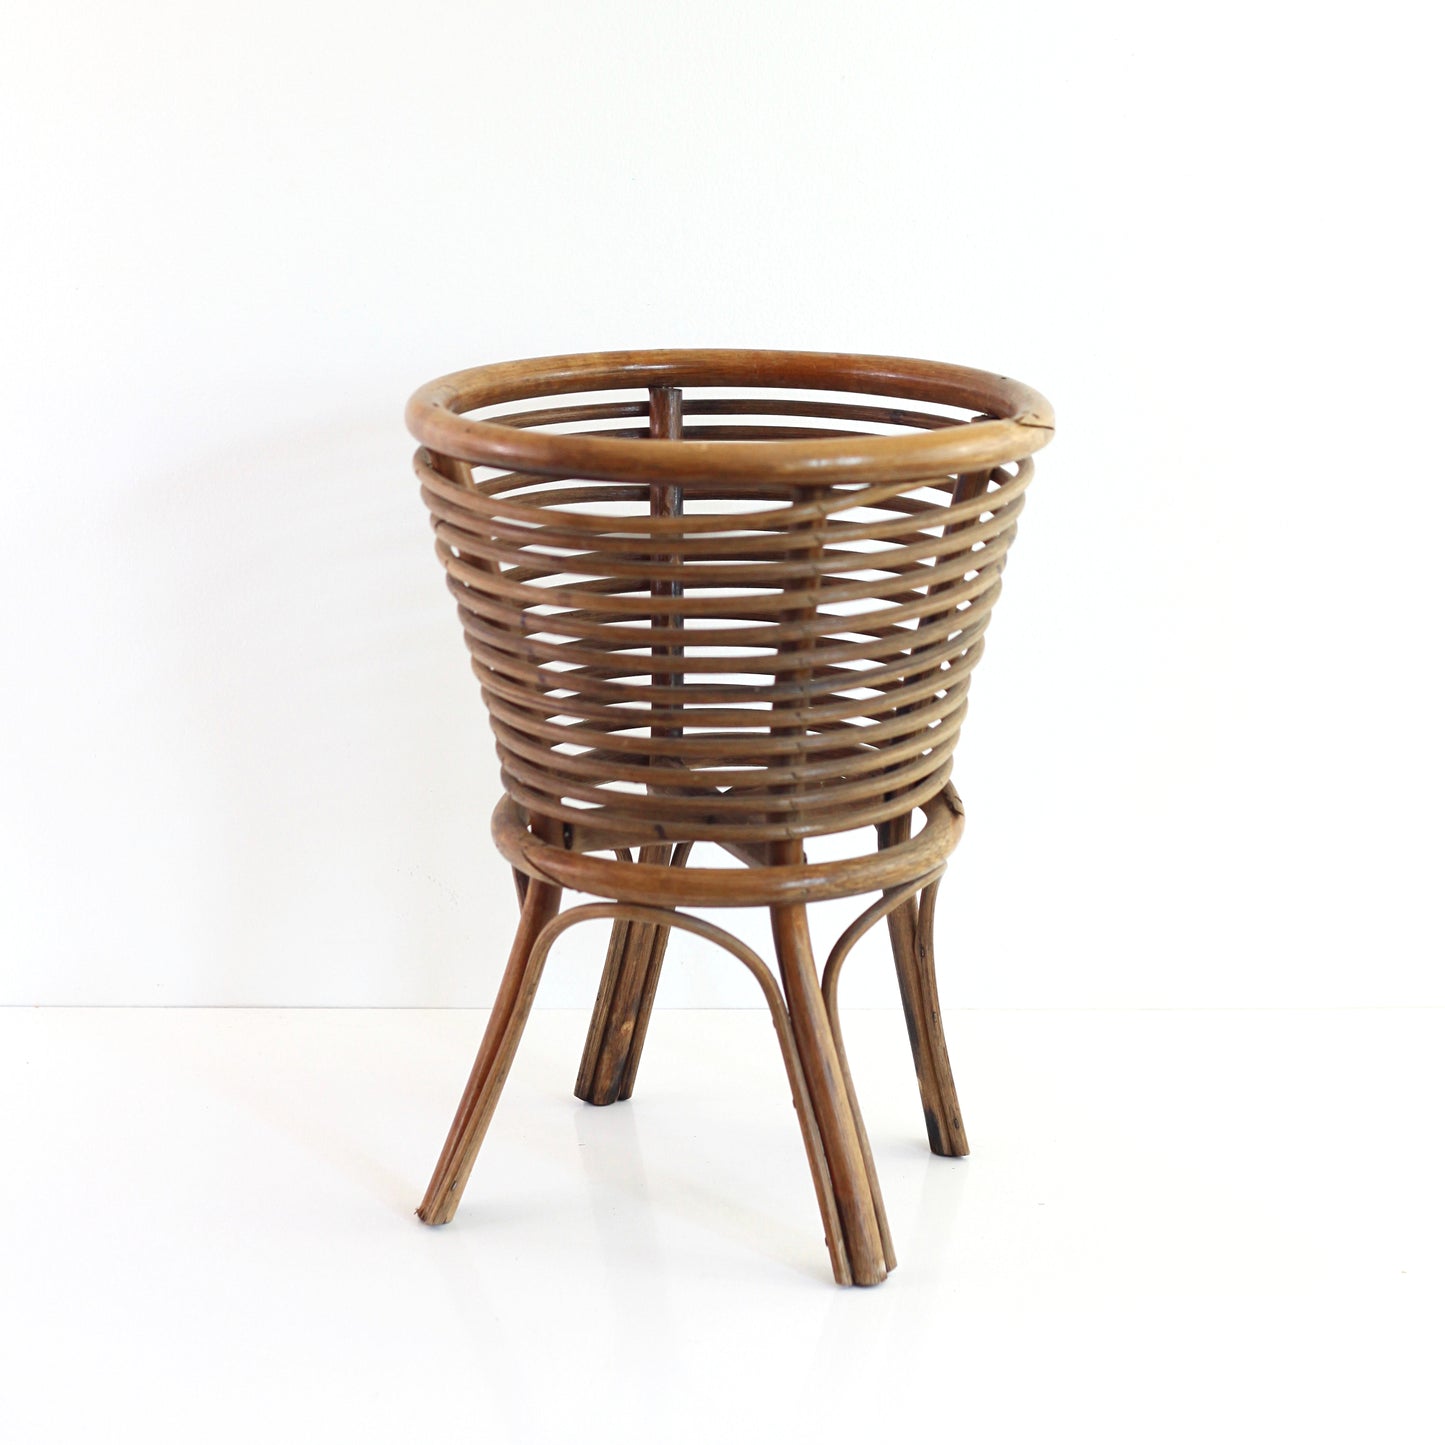 SOLD - Vintage Rattan Plant Stand